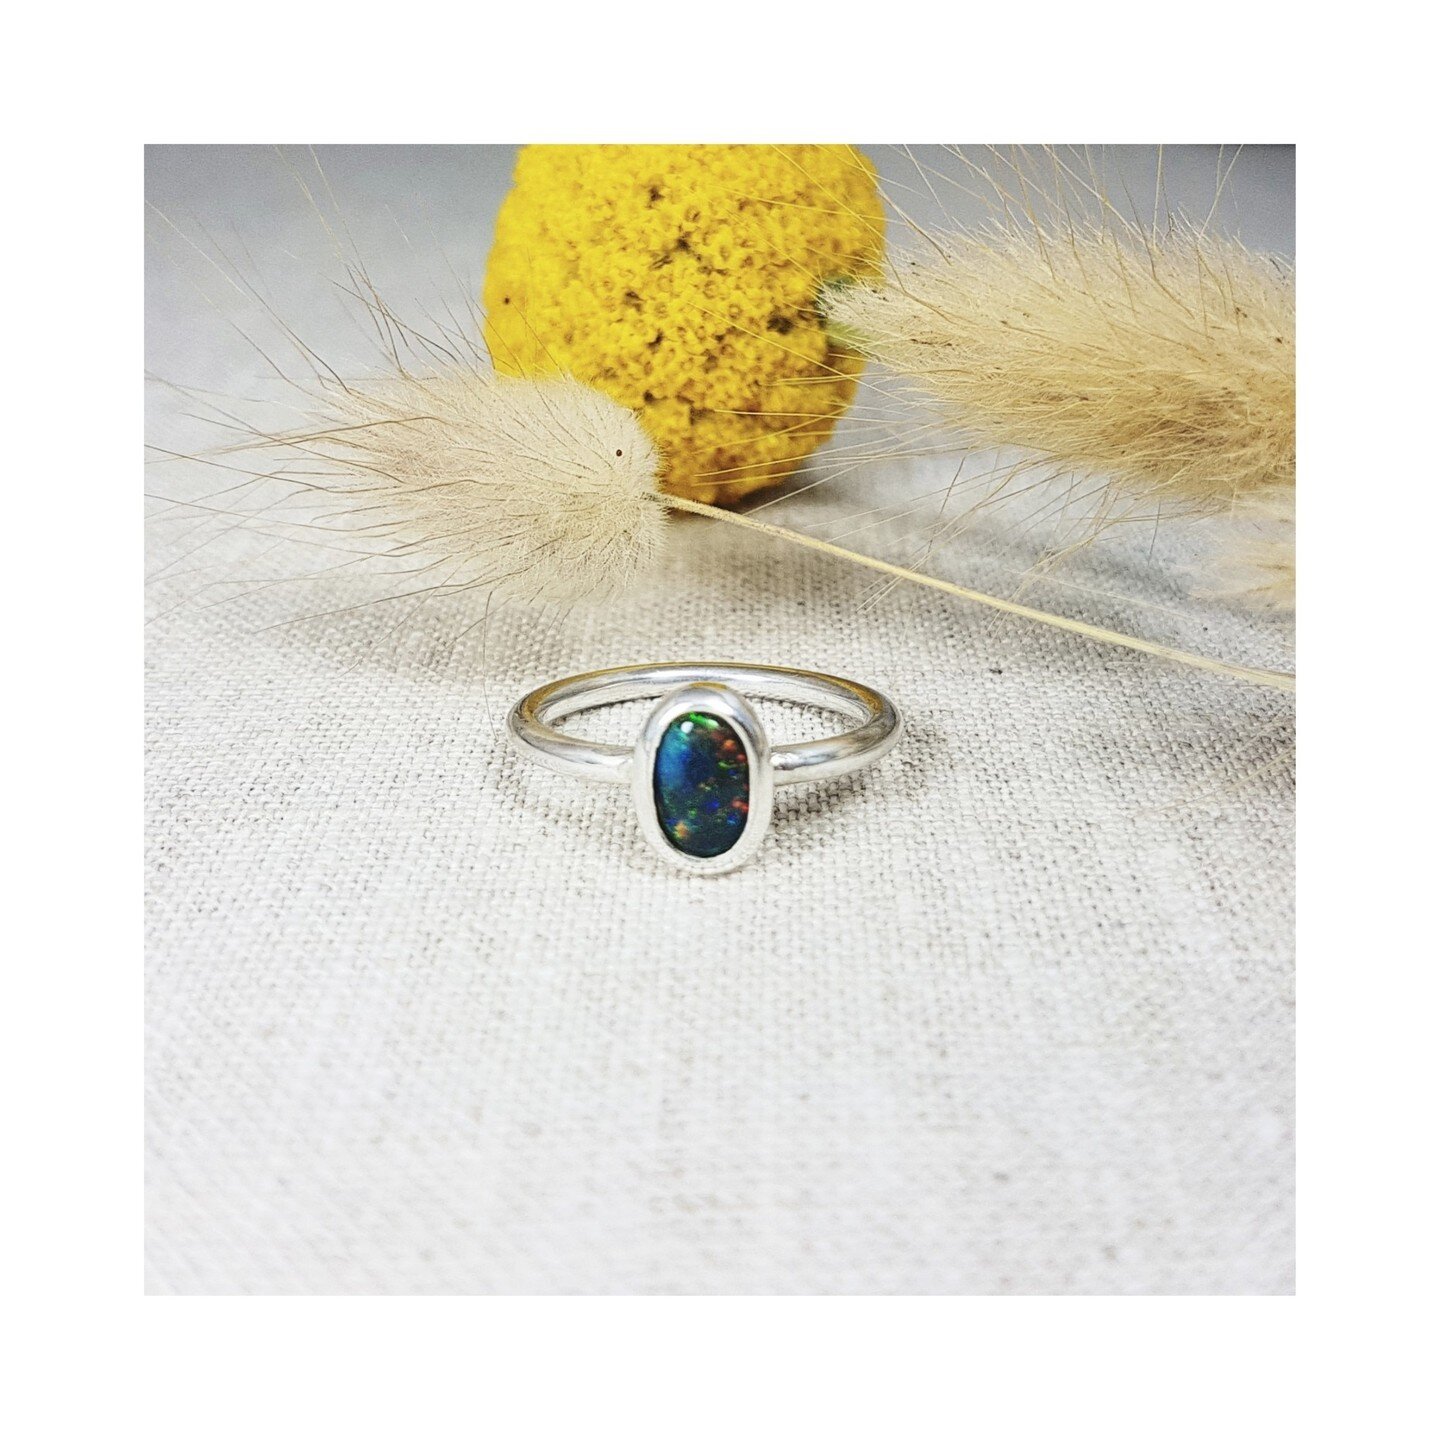 The billy buttons in our garden have flowered!

This black opal sterling silver handcrafted ring is now available and has landed on our website

Enjoy FREE express shipping within Australia for Christmas up until 20 December 

#blackopal #sustainable